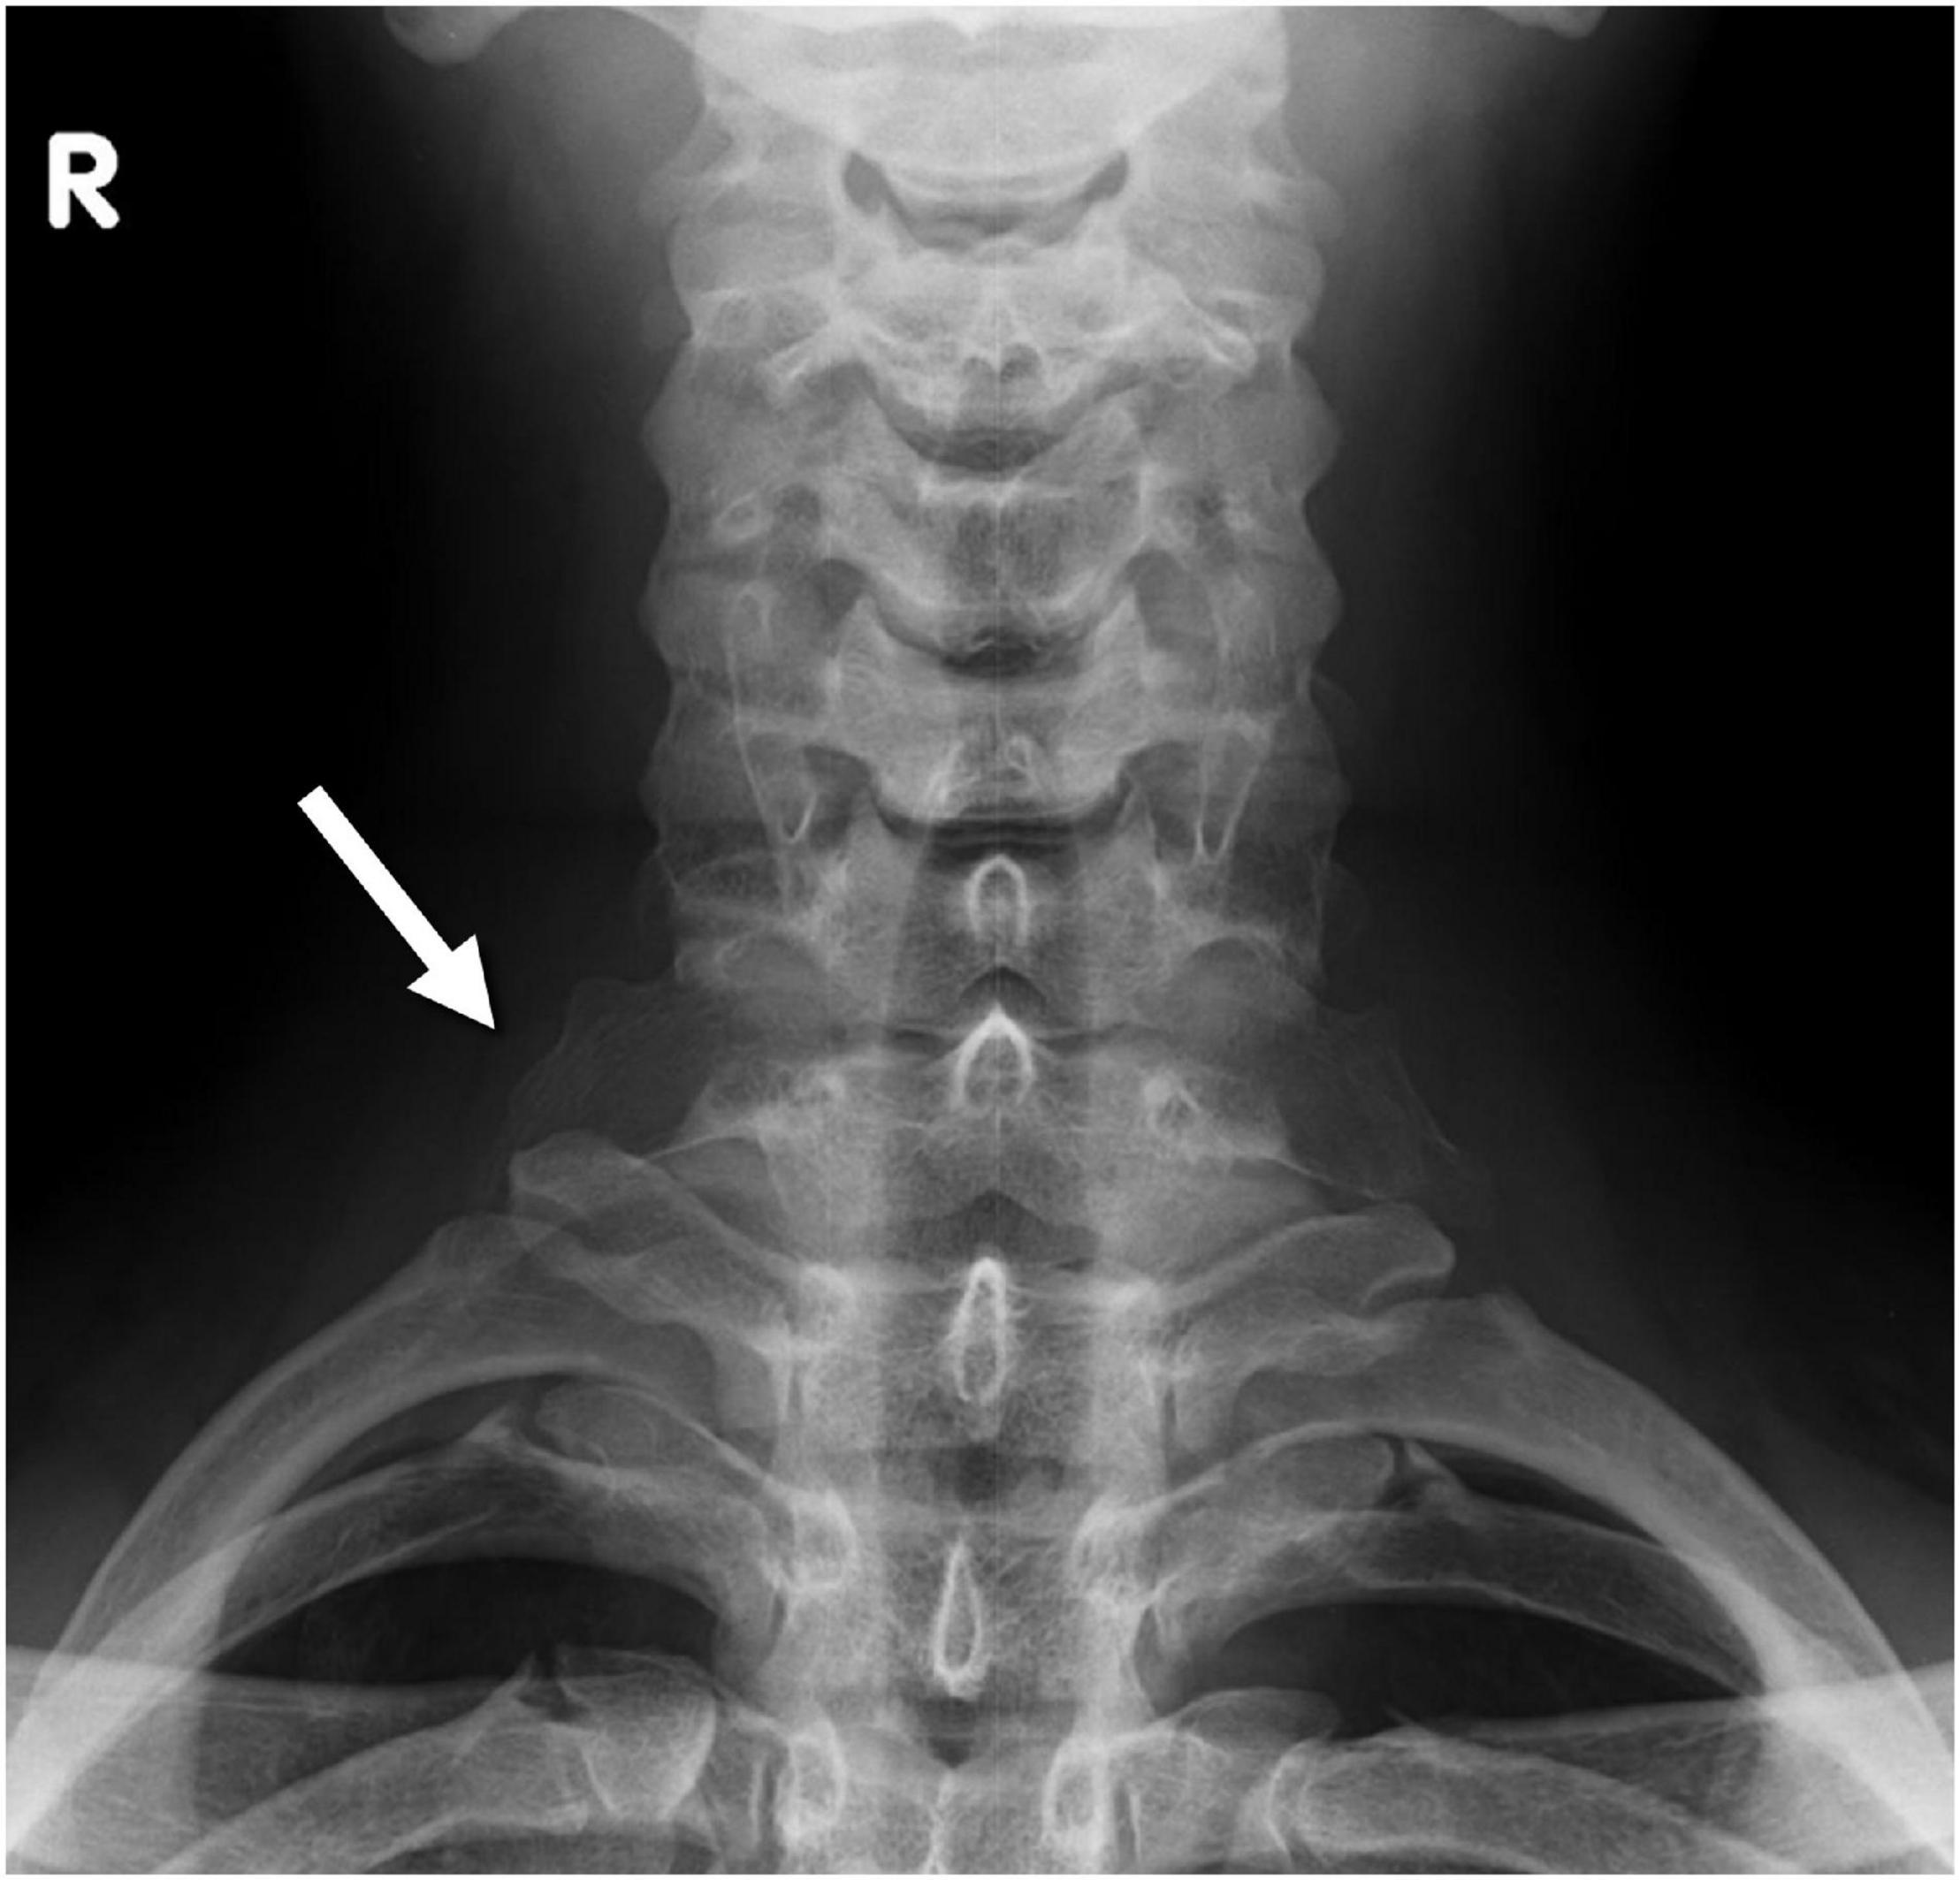 Typical thoracic vertebrae, Radiology Reference Article